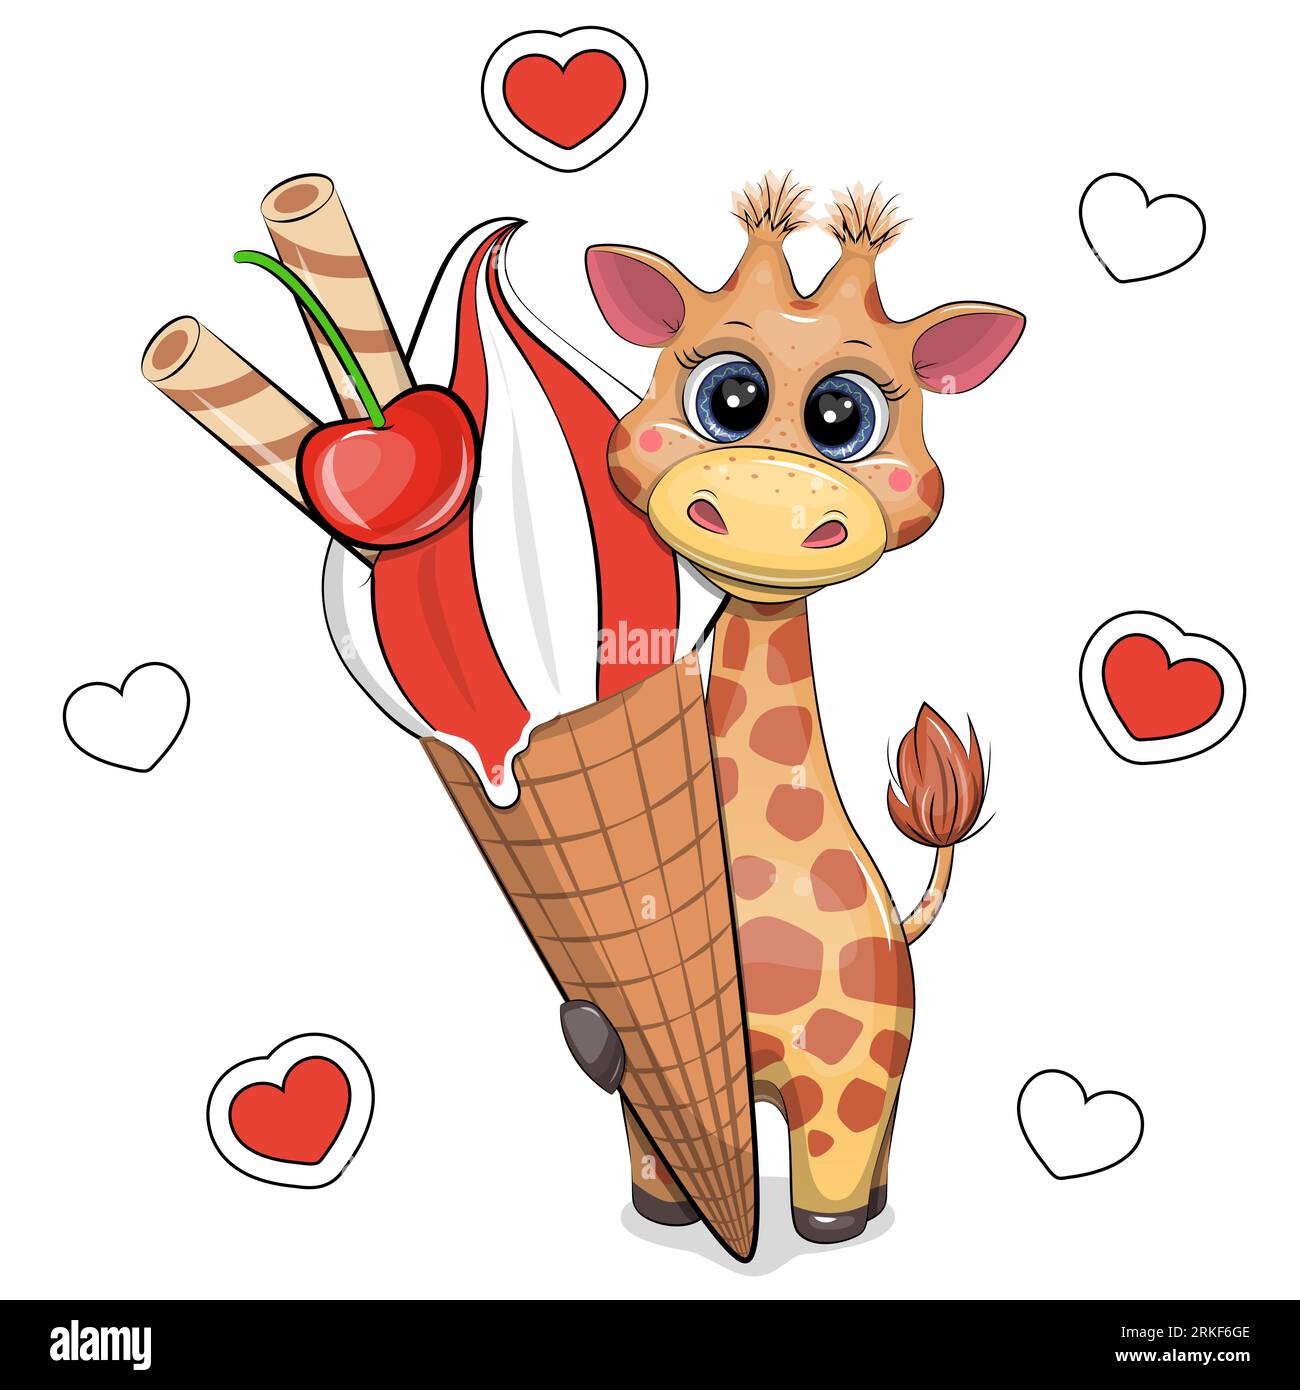 Cute cartoon giraffe with big ice cream. Summer animal vector illustration on white background with red hearts. Stock Vector